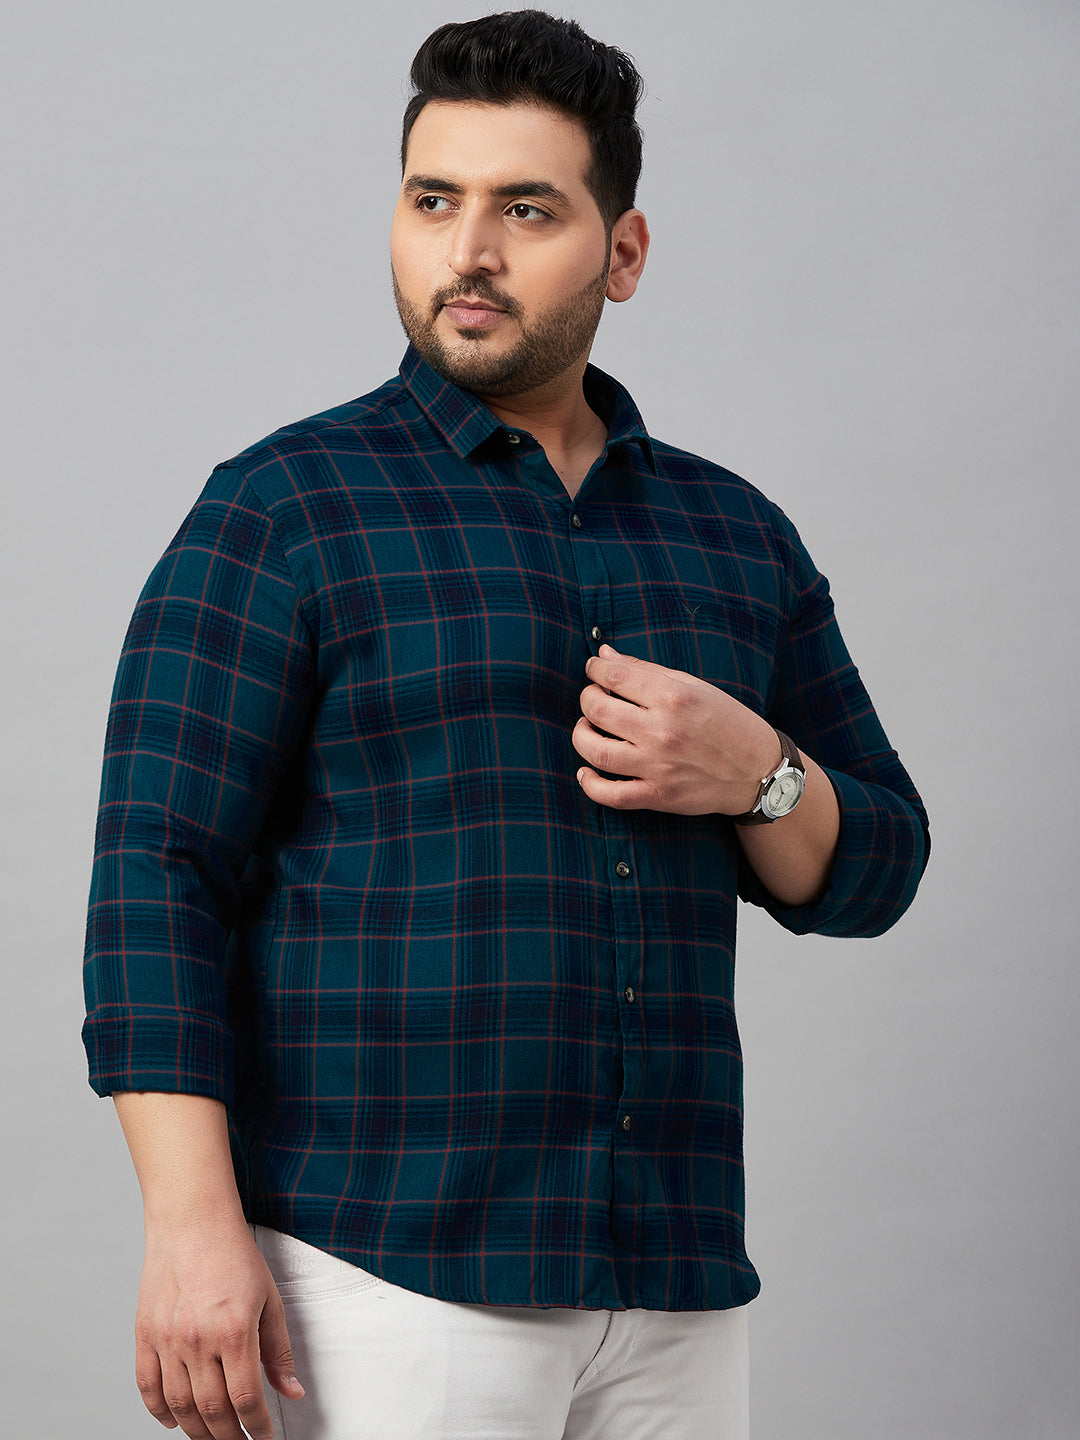 Men Checked Teal Classic Shirt